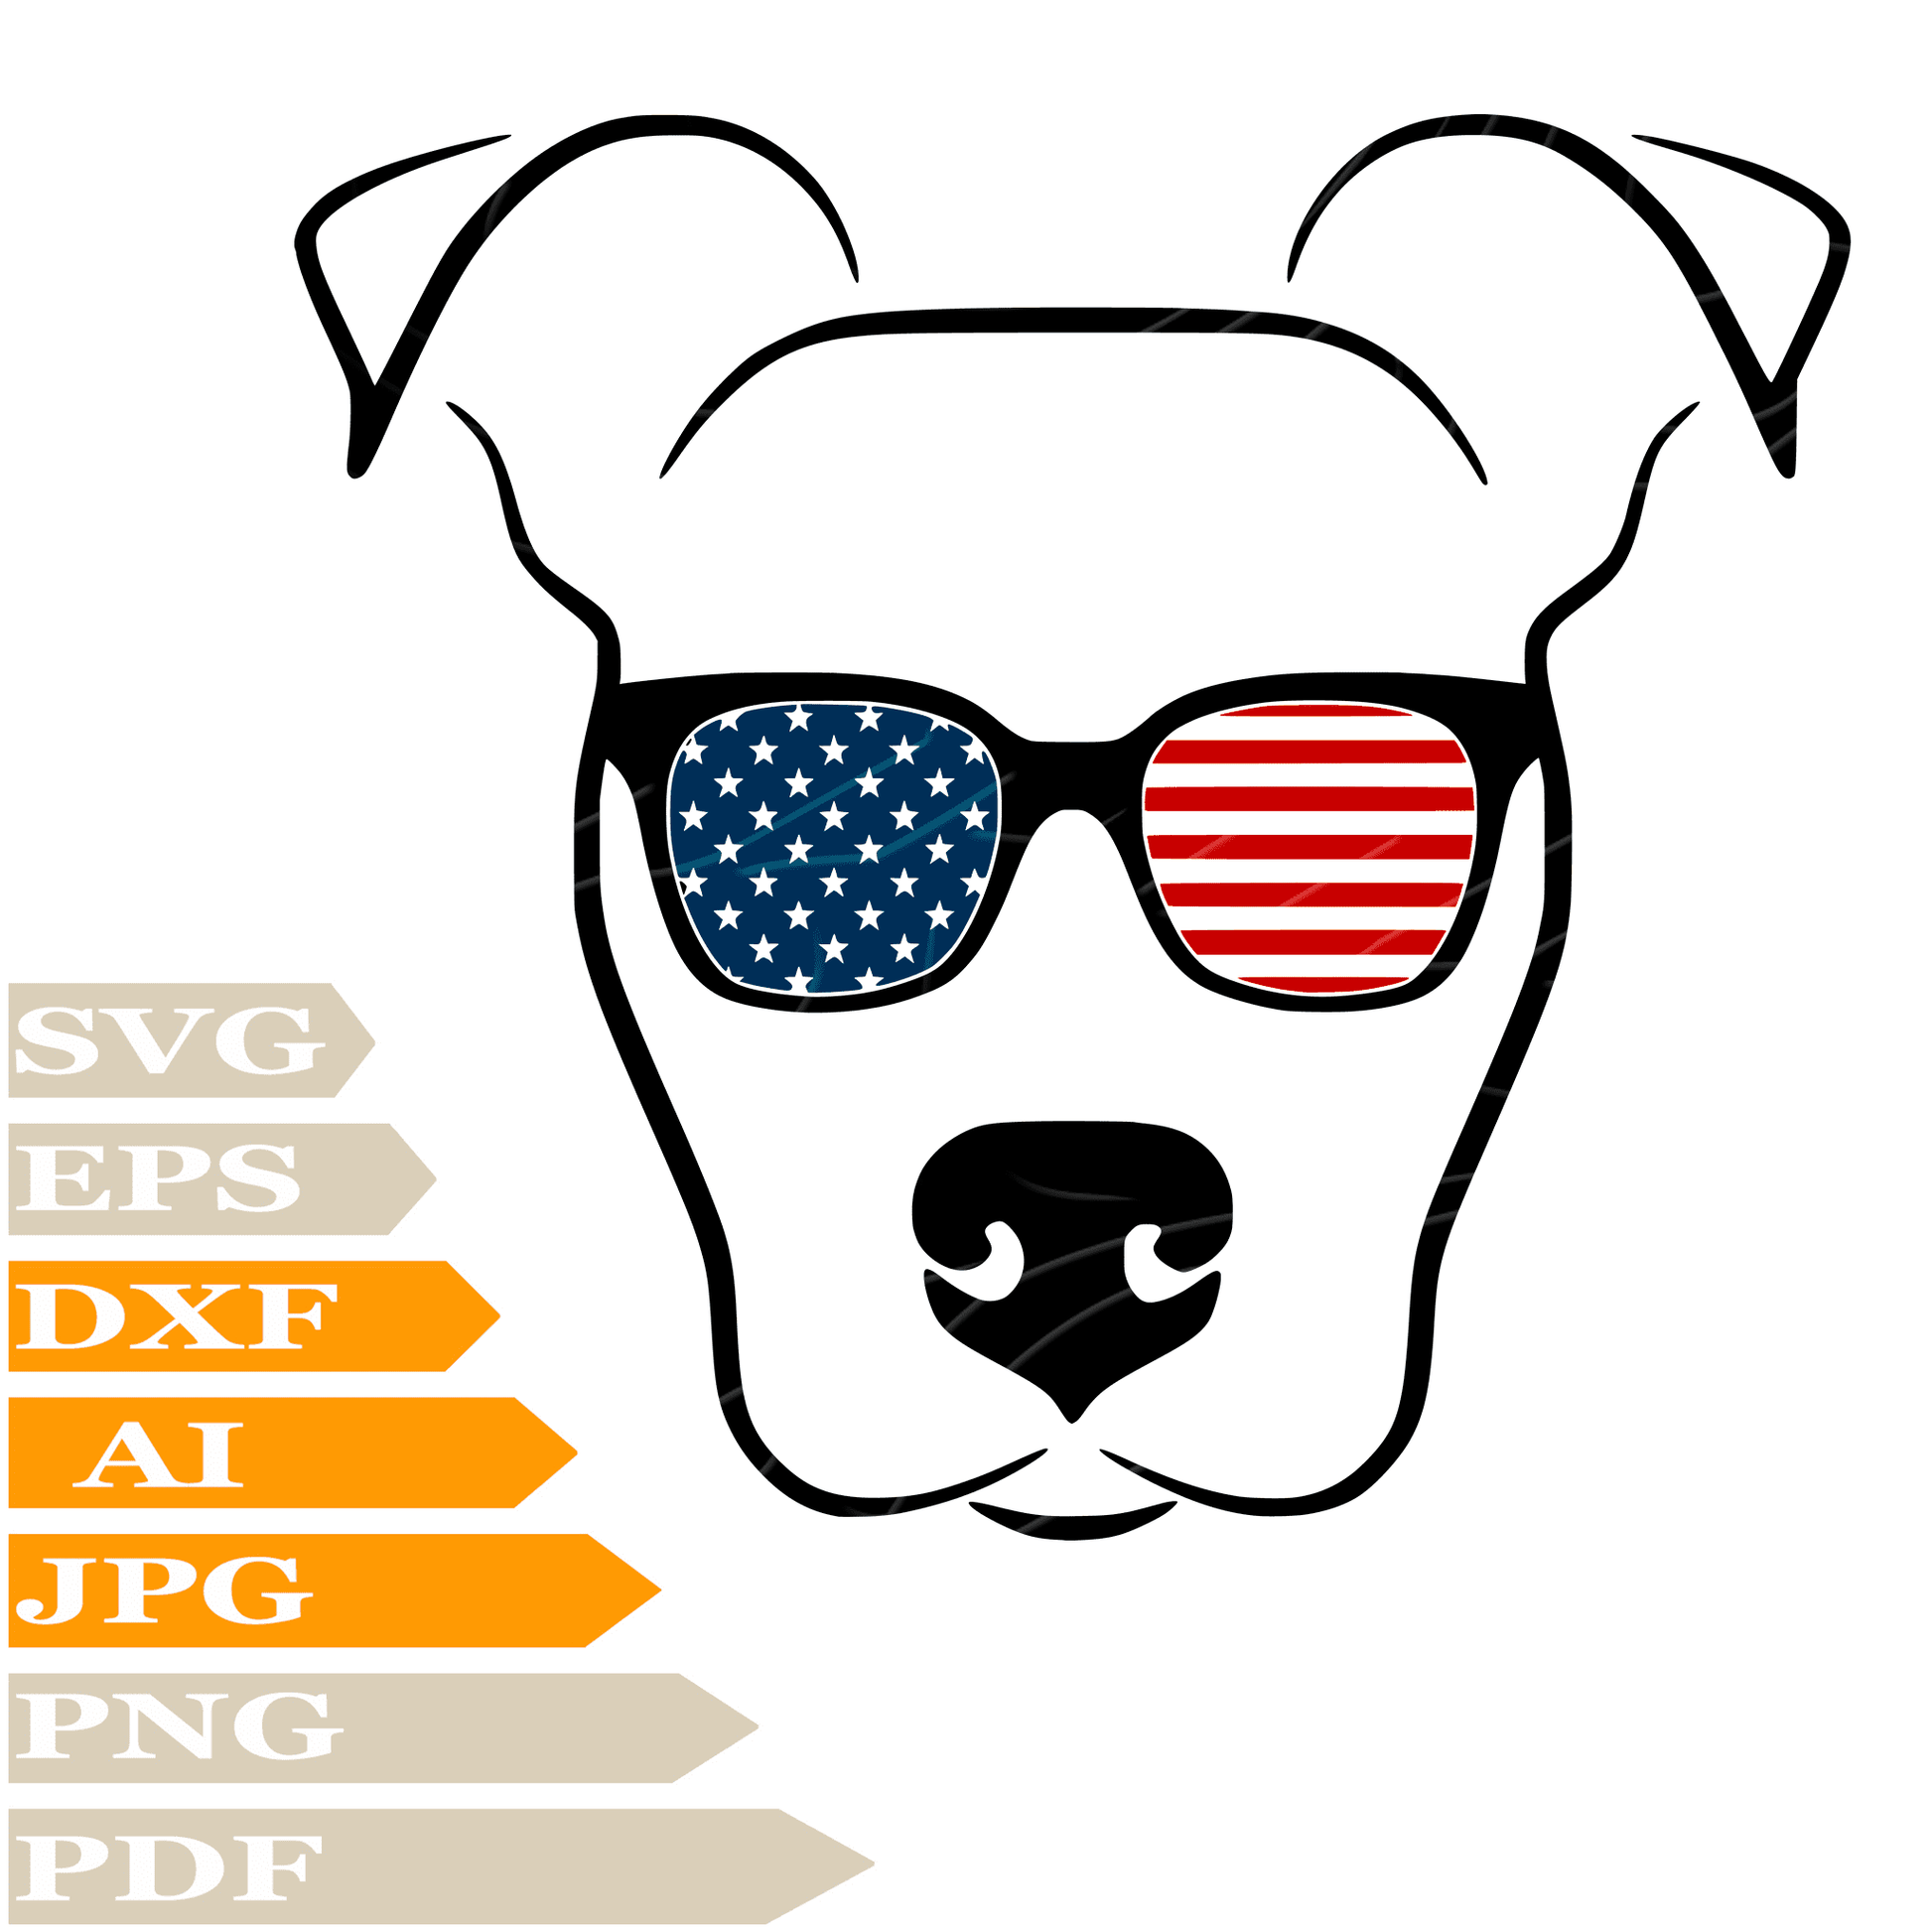 Cute Dog SVG File, Funny Cute Dog  SVG Design, Dog  With Sunglasses Vector Graphics, Dog Head PNG, Cricut, Image Cut, Clipart,  For Tattoo, Cut File, Silhouette